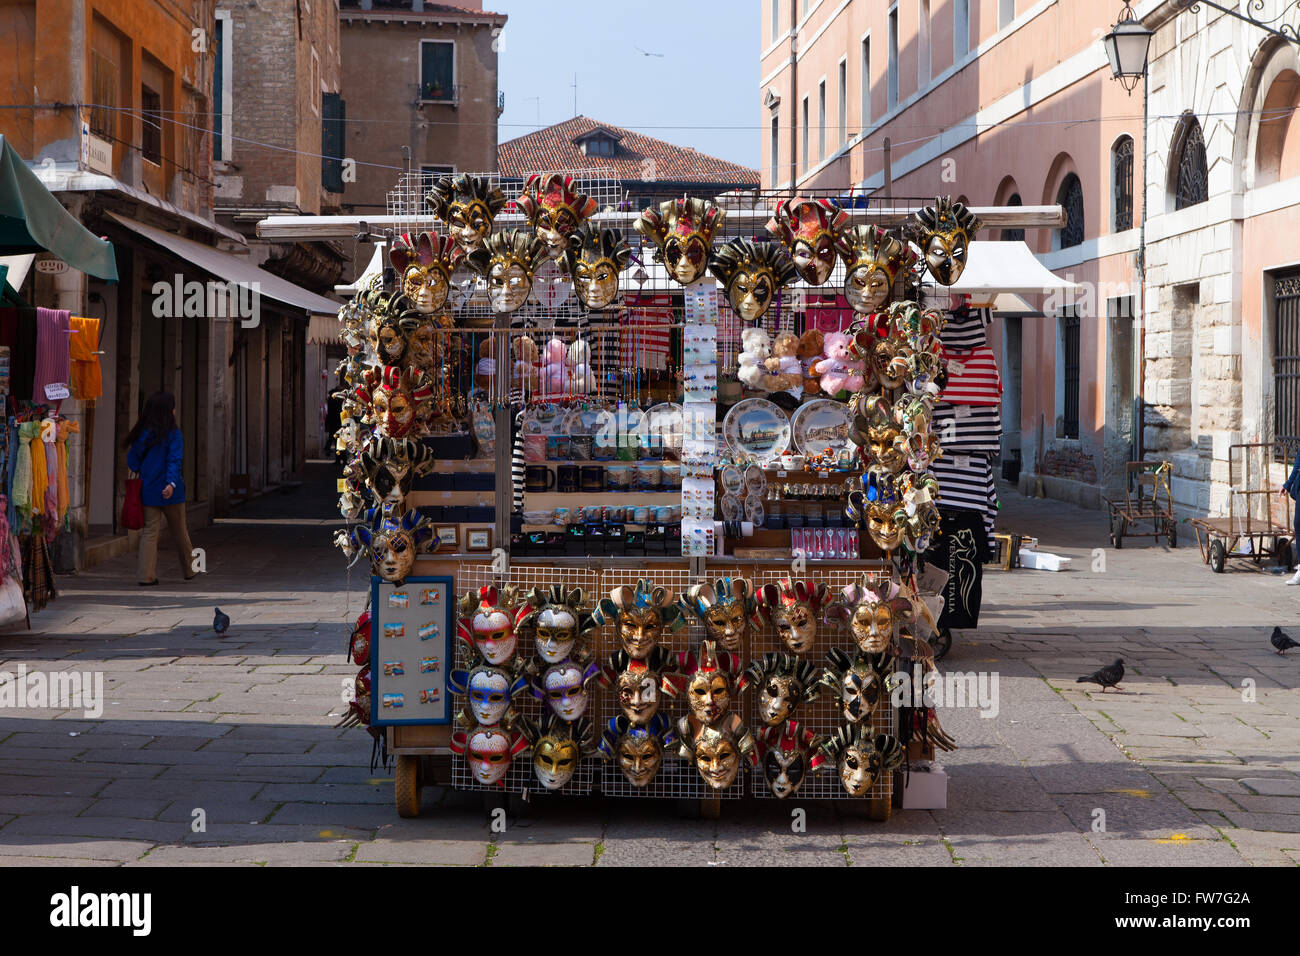 Typical souvenir stand in Piazza San Marco, offering a wide variety of traditional Venetian symbolic goods Stock Photo